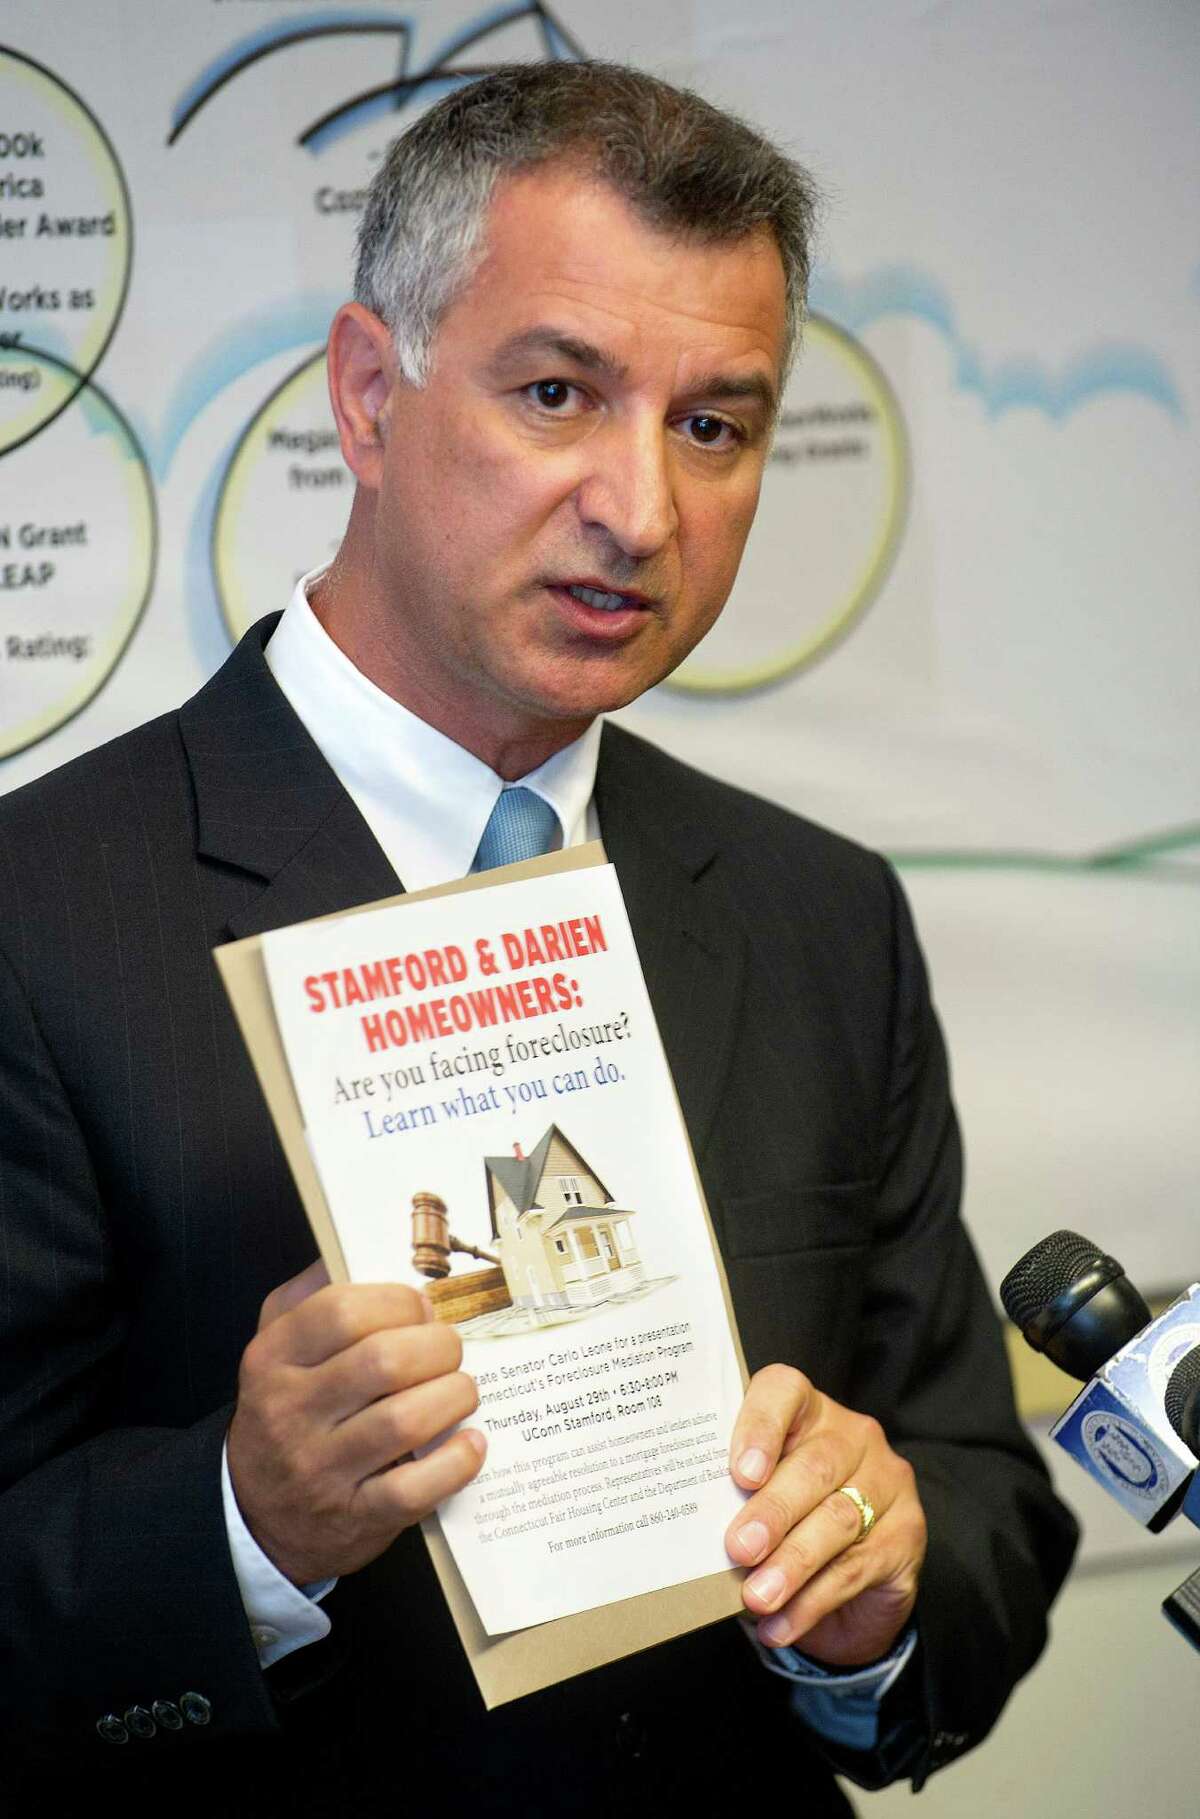 State Senator Carlo Leone speaks during a bill-signing ceremony for a law regarding protections for homeowners facing foreclosure at the Housing Development Fund offices in Stamford, Conn., on Tuesday, August 13, 2013.